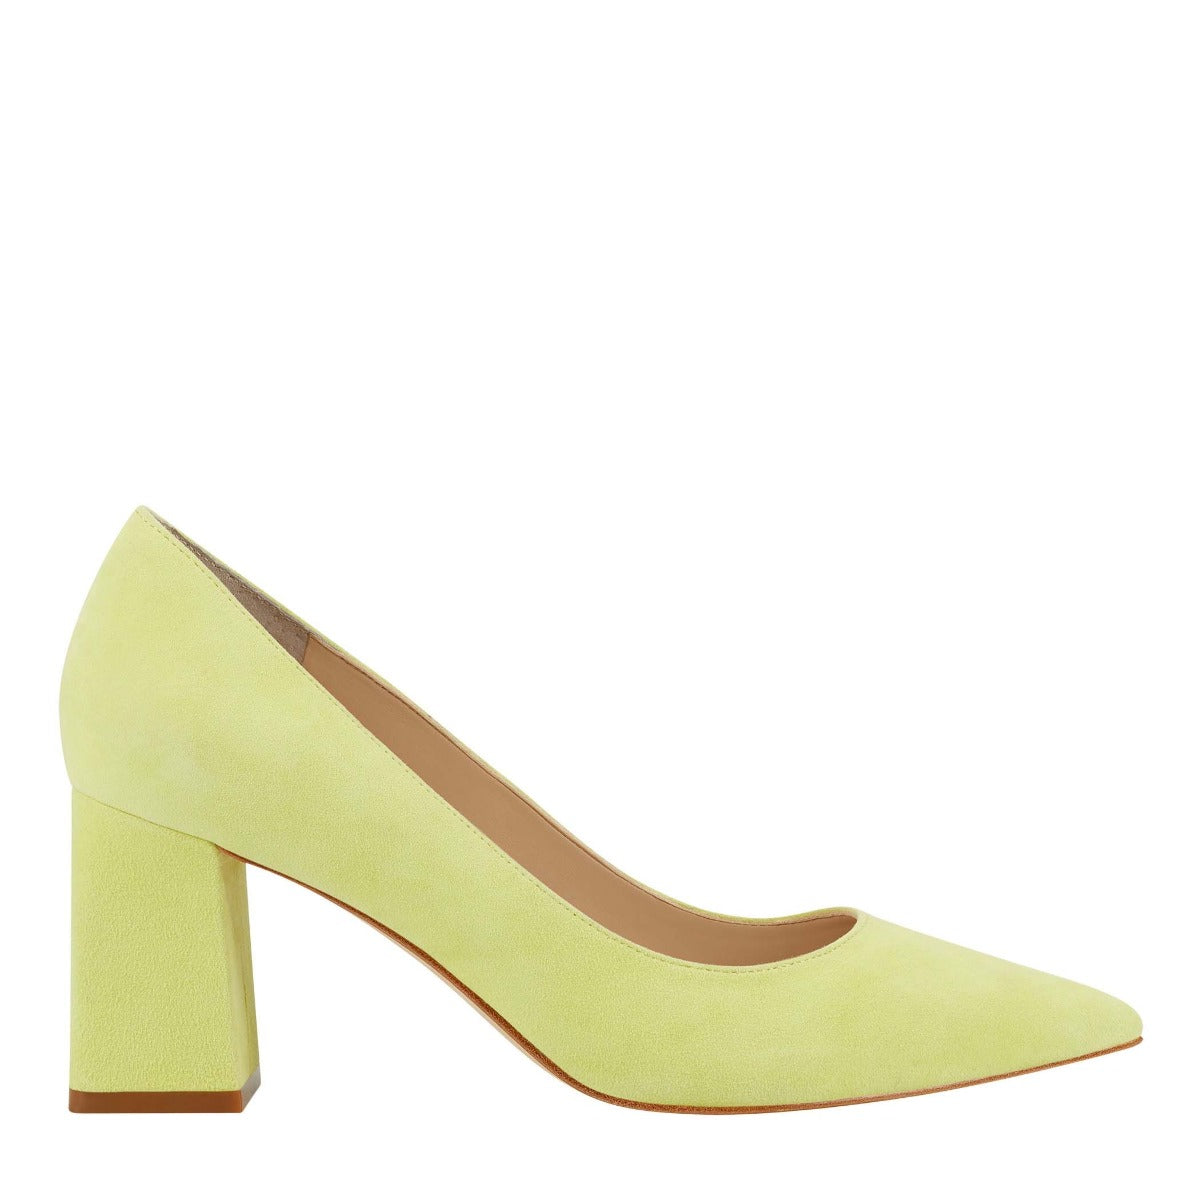 marc fisher green pumps